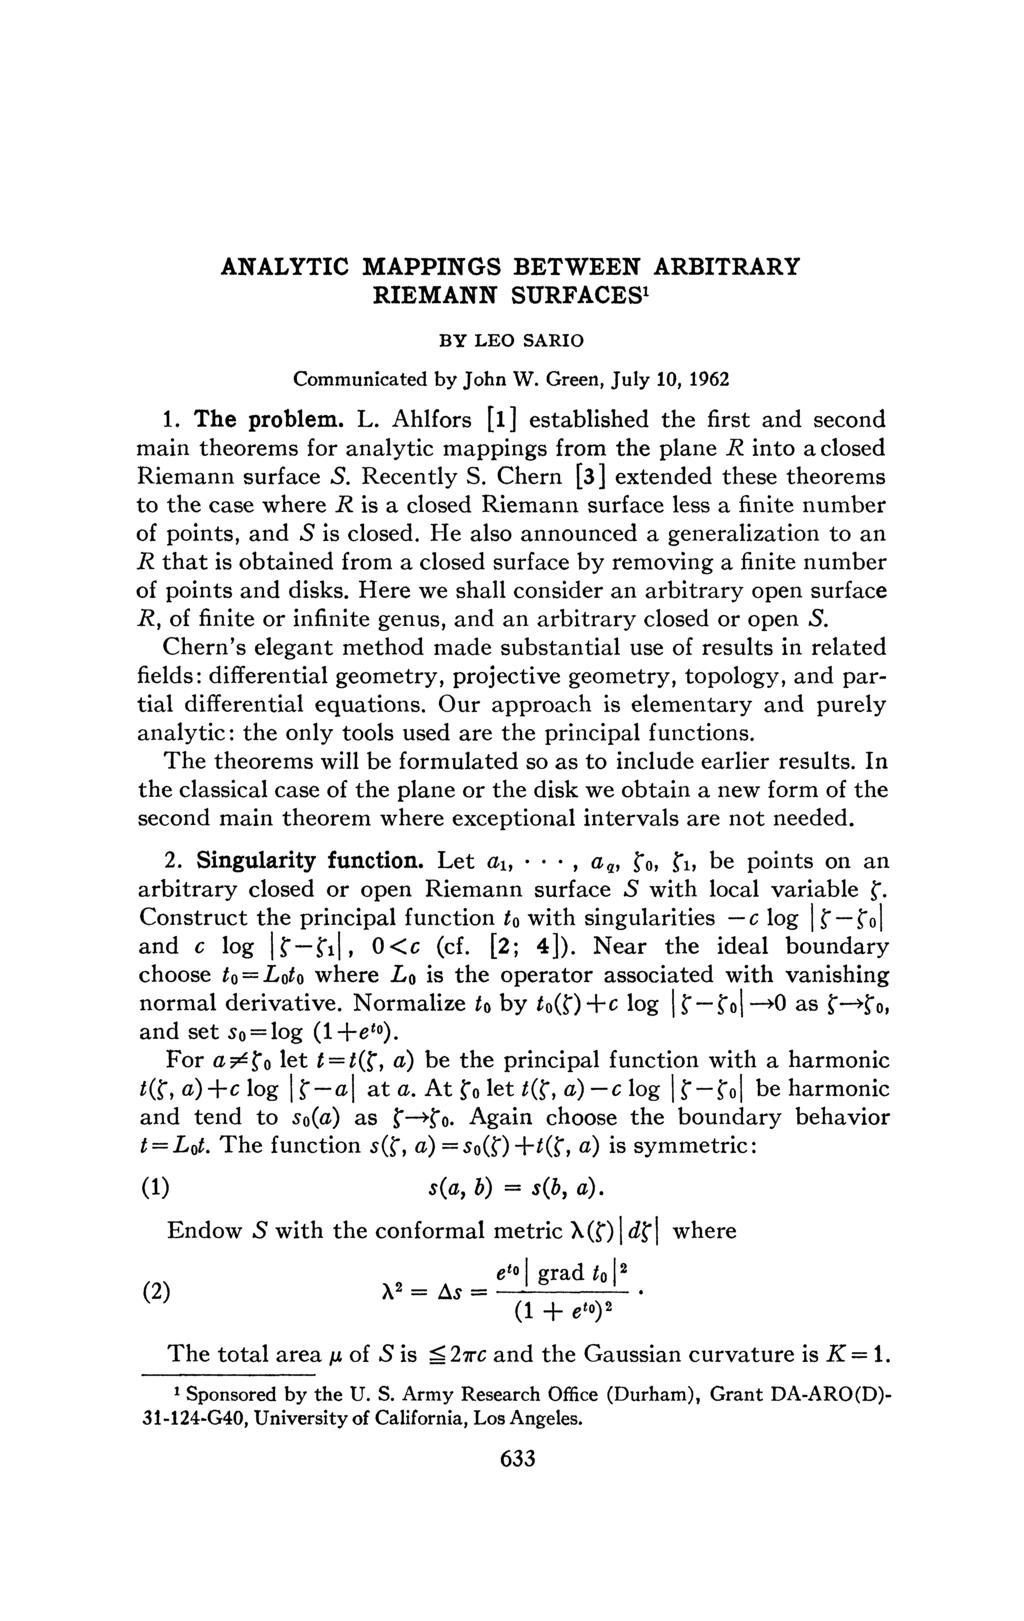 ANALYTIC MAPPINGS BETWEEN ARBITRARY RIEMANN SURFACES 1 BY LEO SARIO Communicated by John W. Green, July 10, 1962 1. The problem. L. Ahlfors [l] established the first and second main theorems for analytic mappings from the plane R into a closed Riemann surface S.